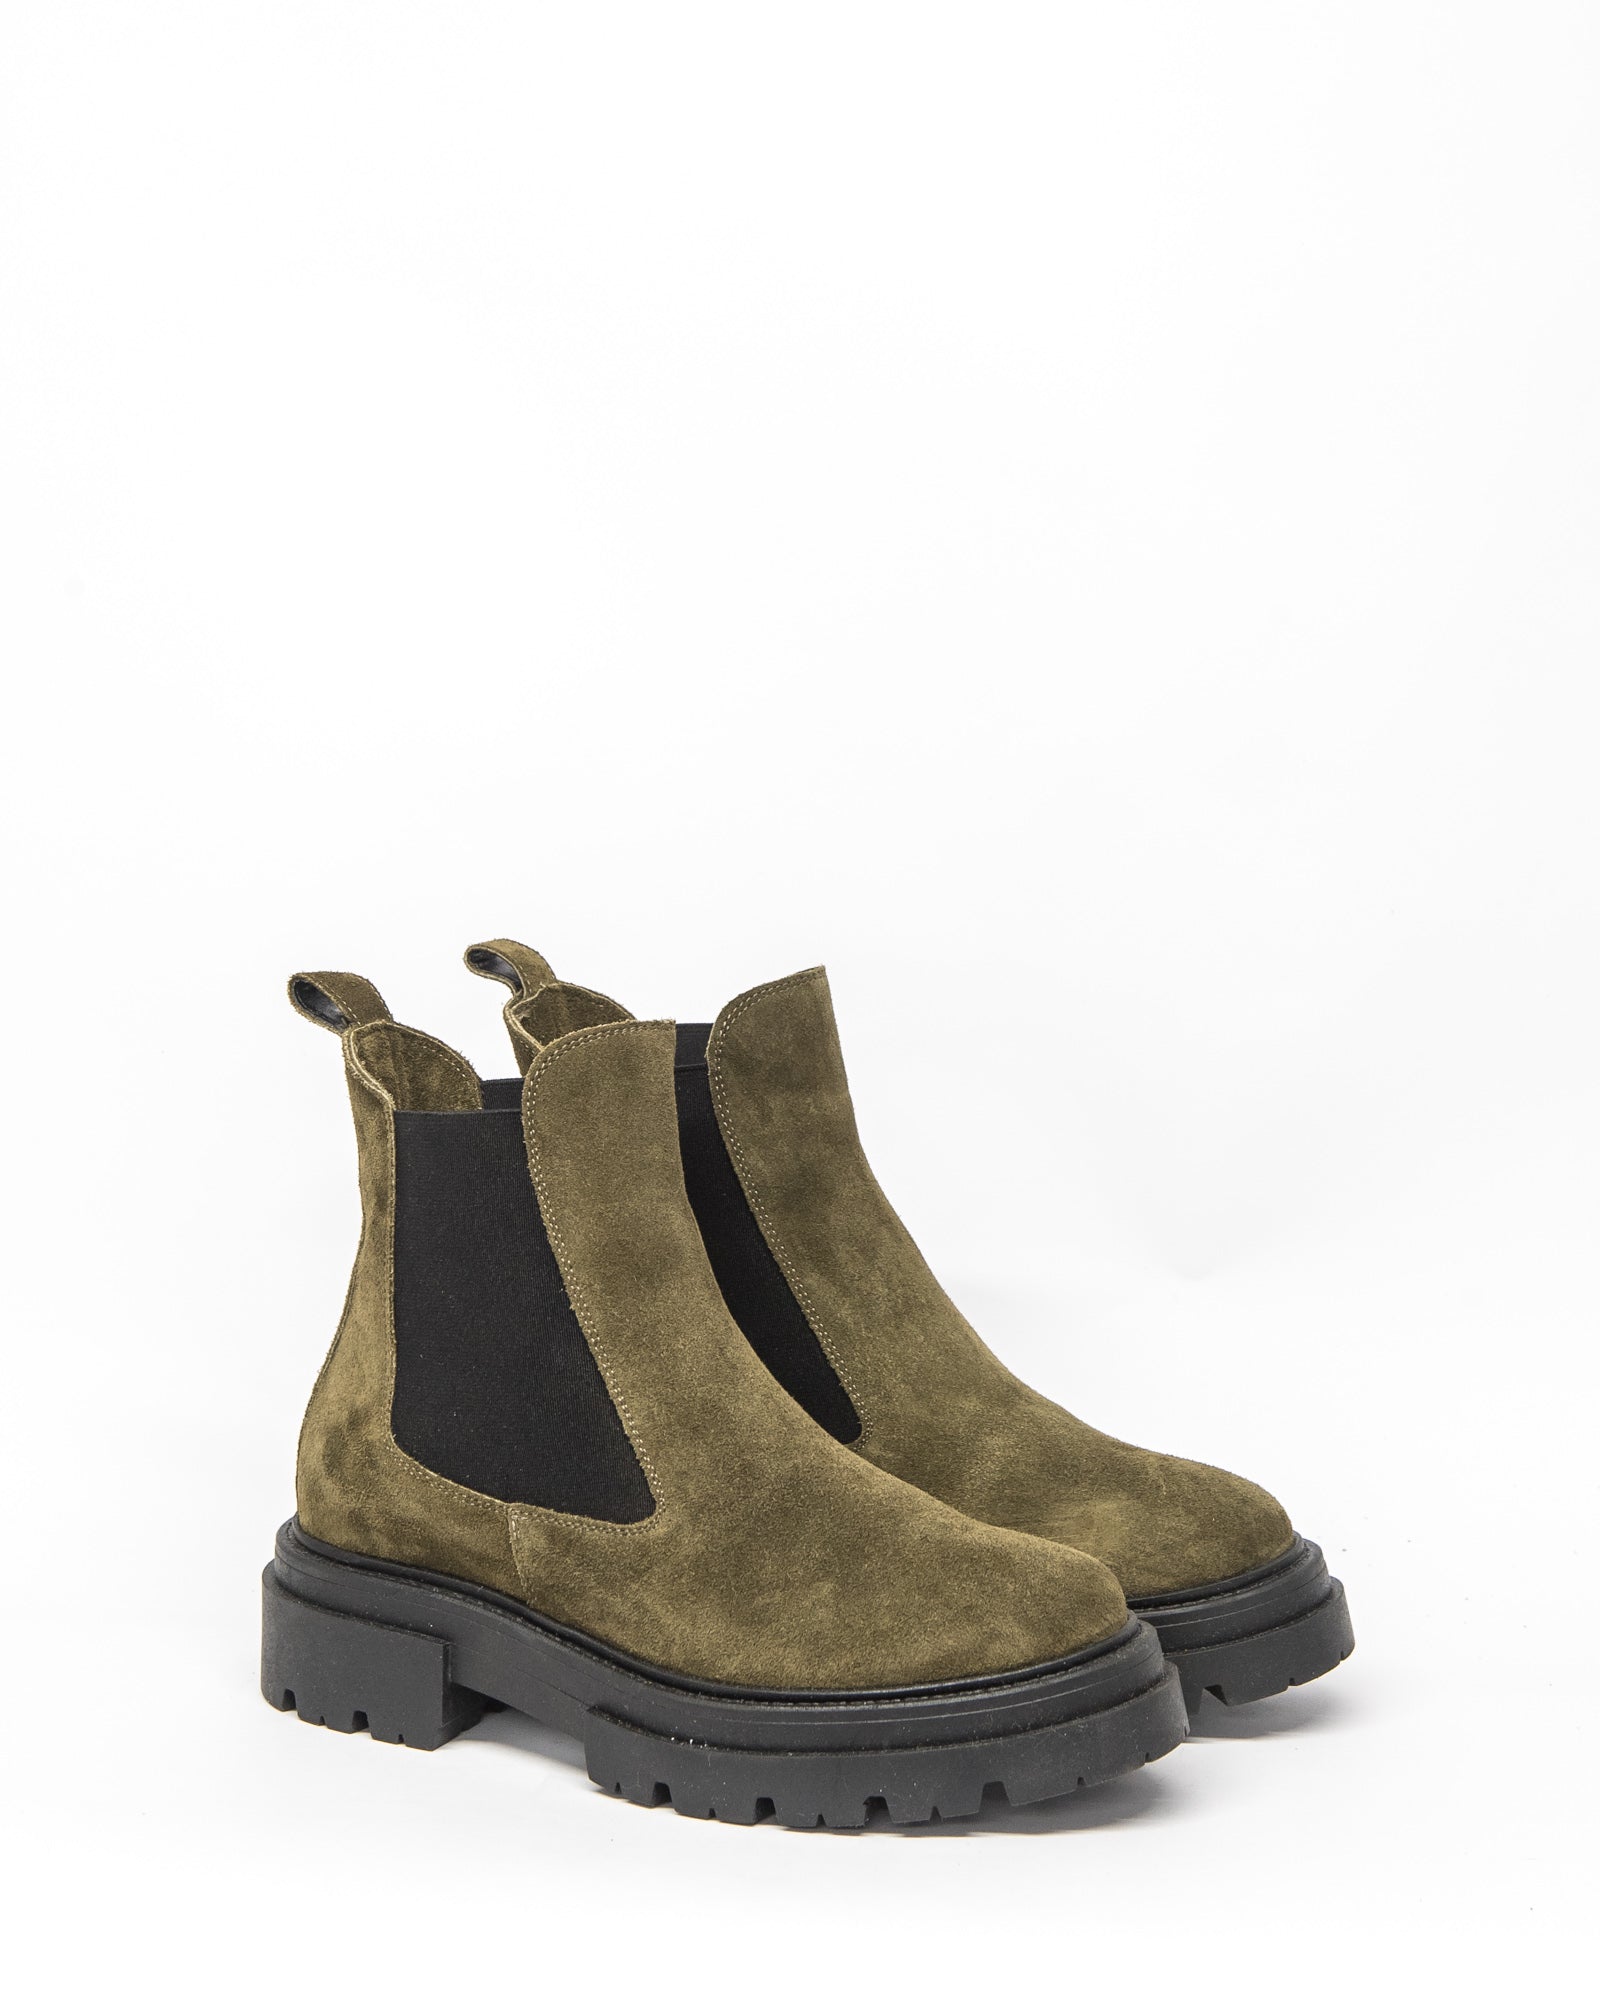 compass boot - green suede